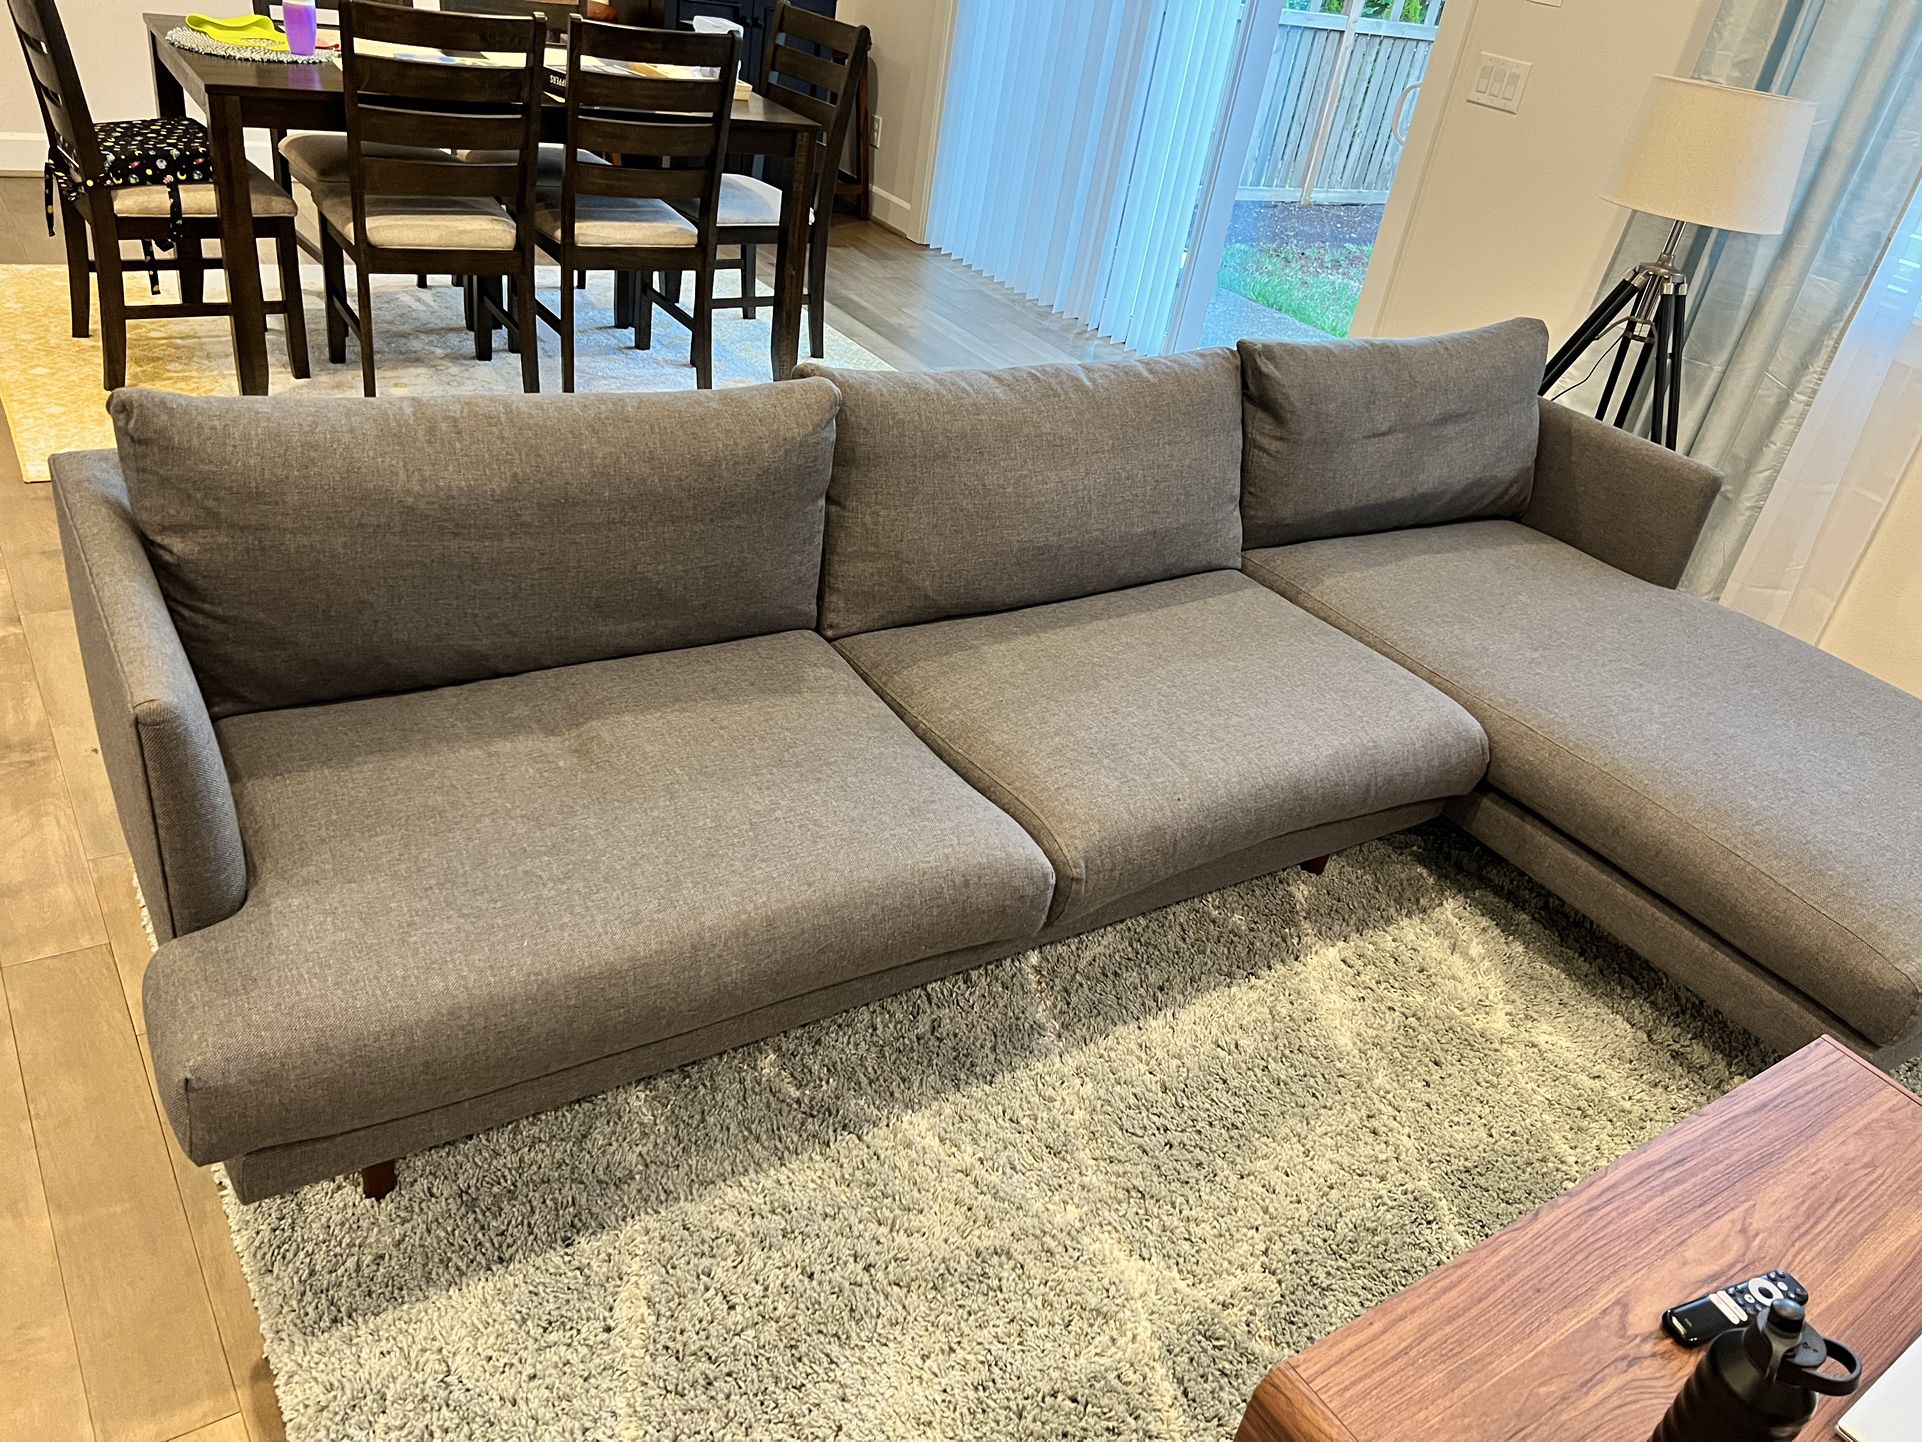 Article Burrad Right sectional  Light gray